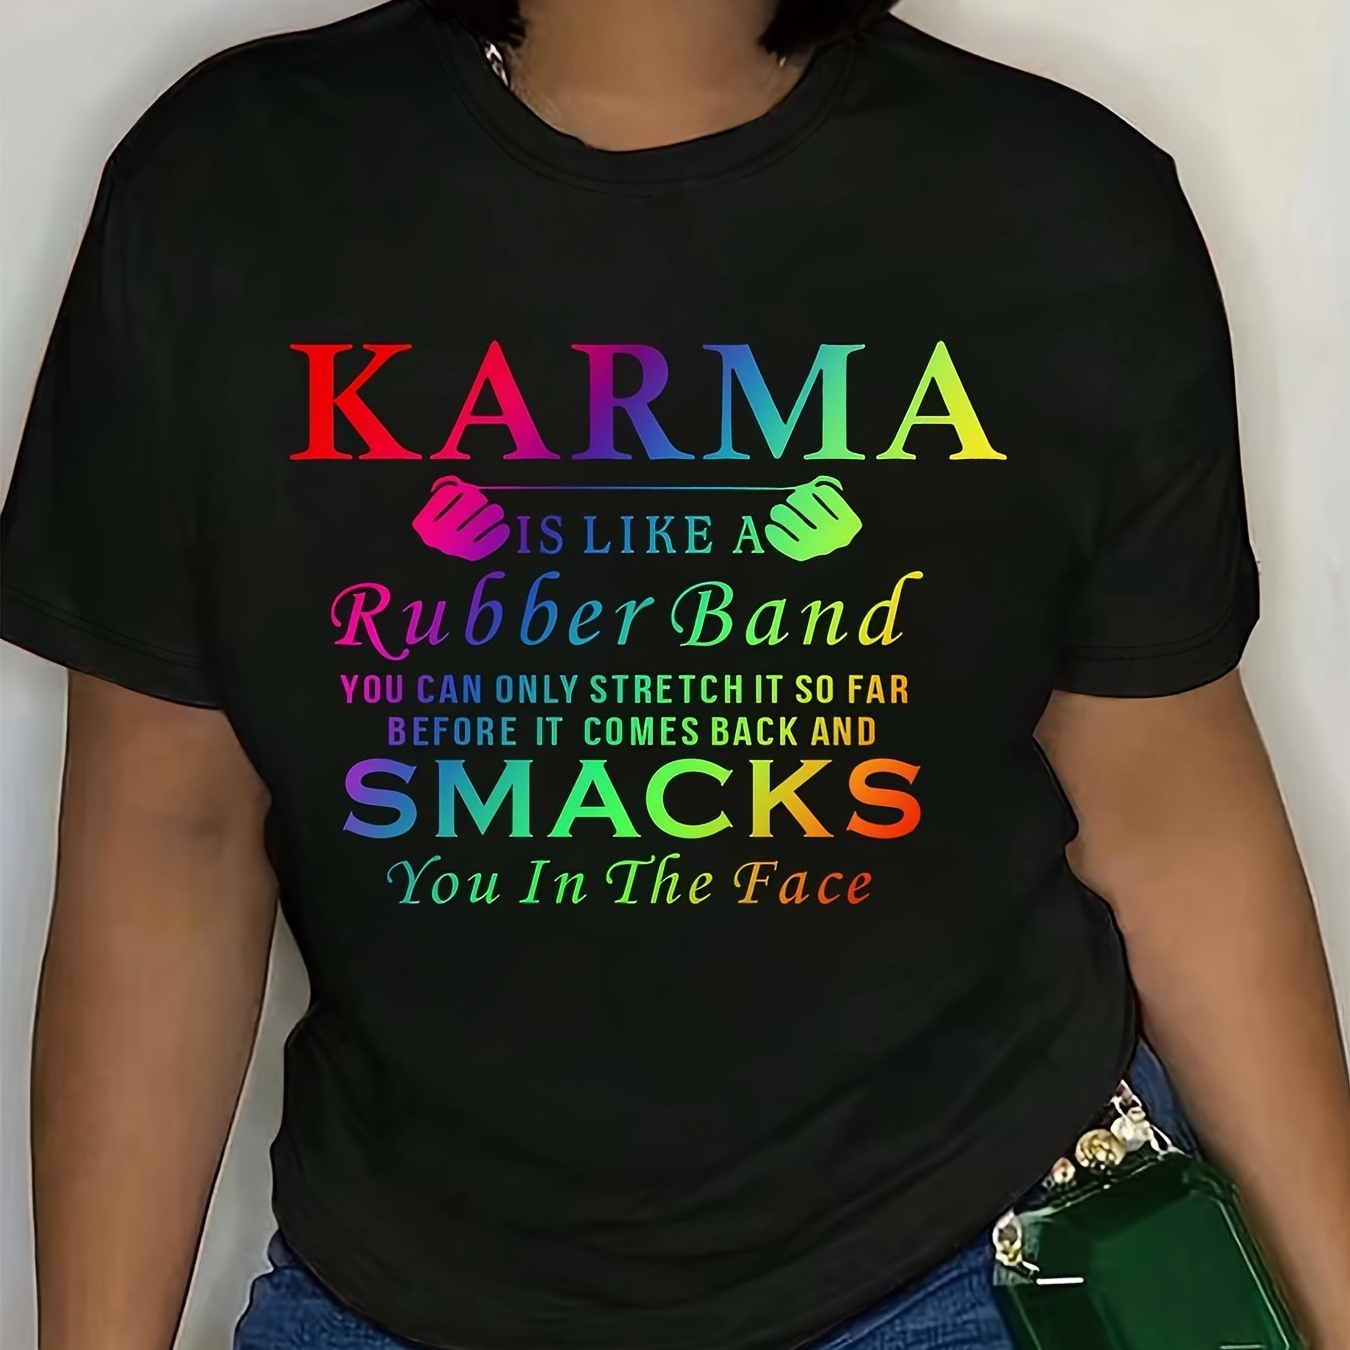 

Karma Letter Print T-shirt, Short Sleeve Crew Neck Casual Top For Summer & Spring, Women's Clothing